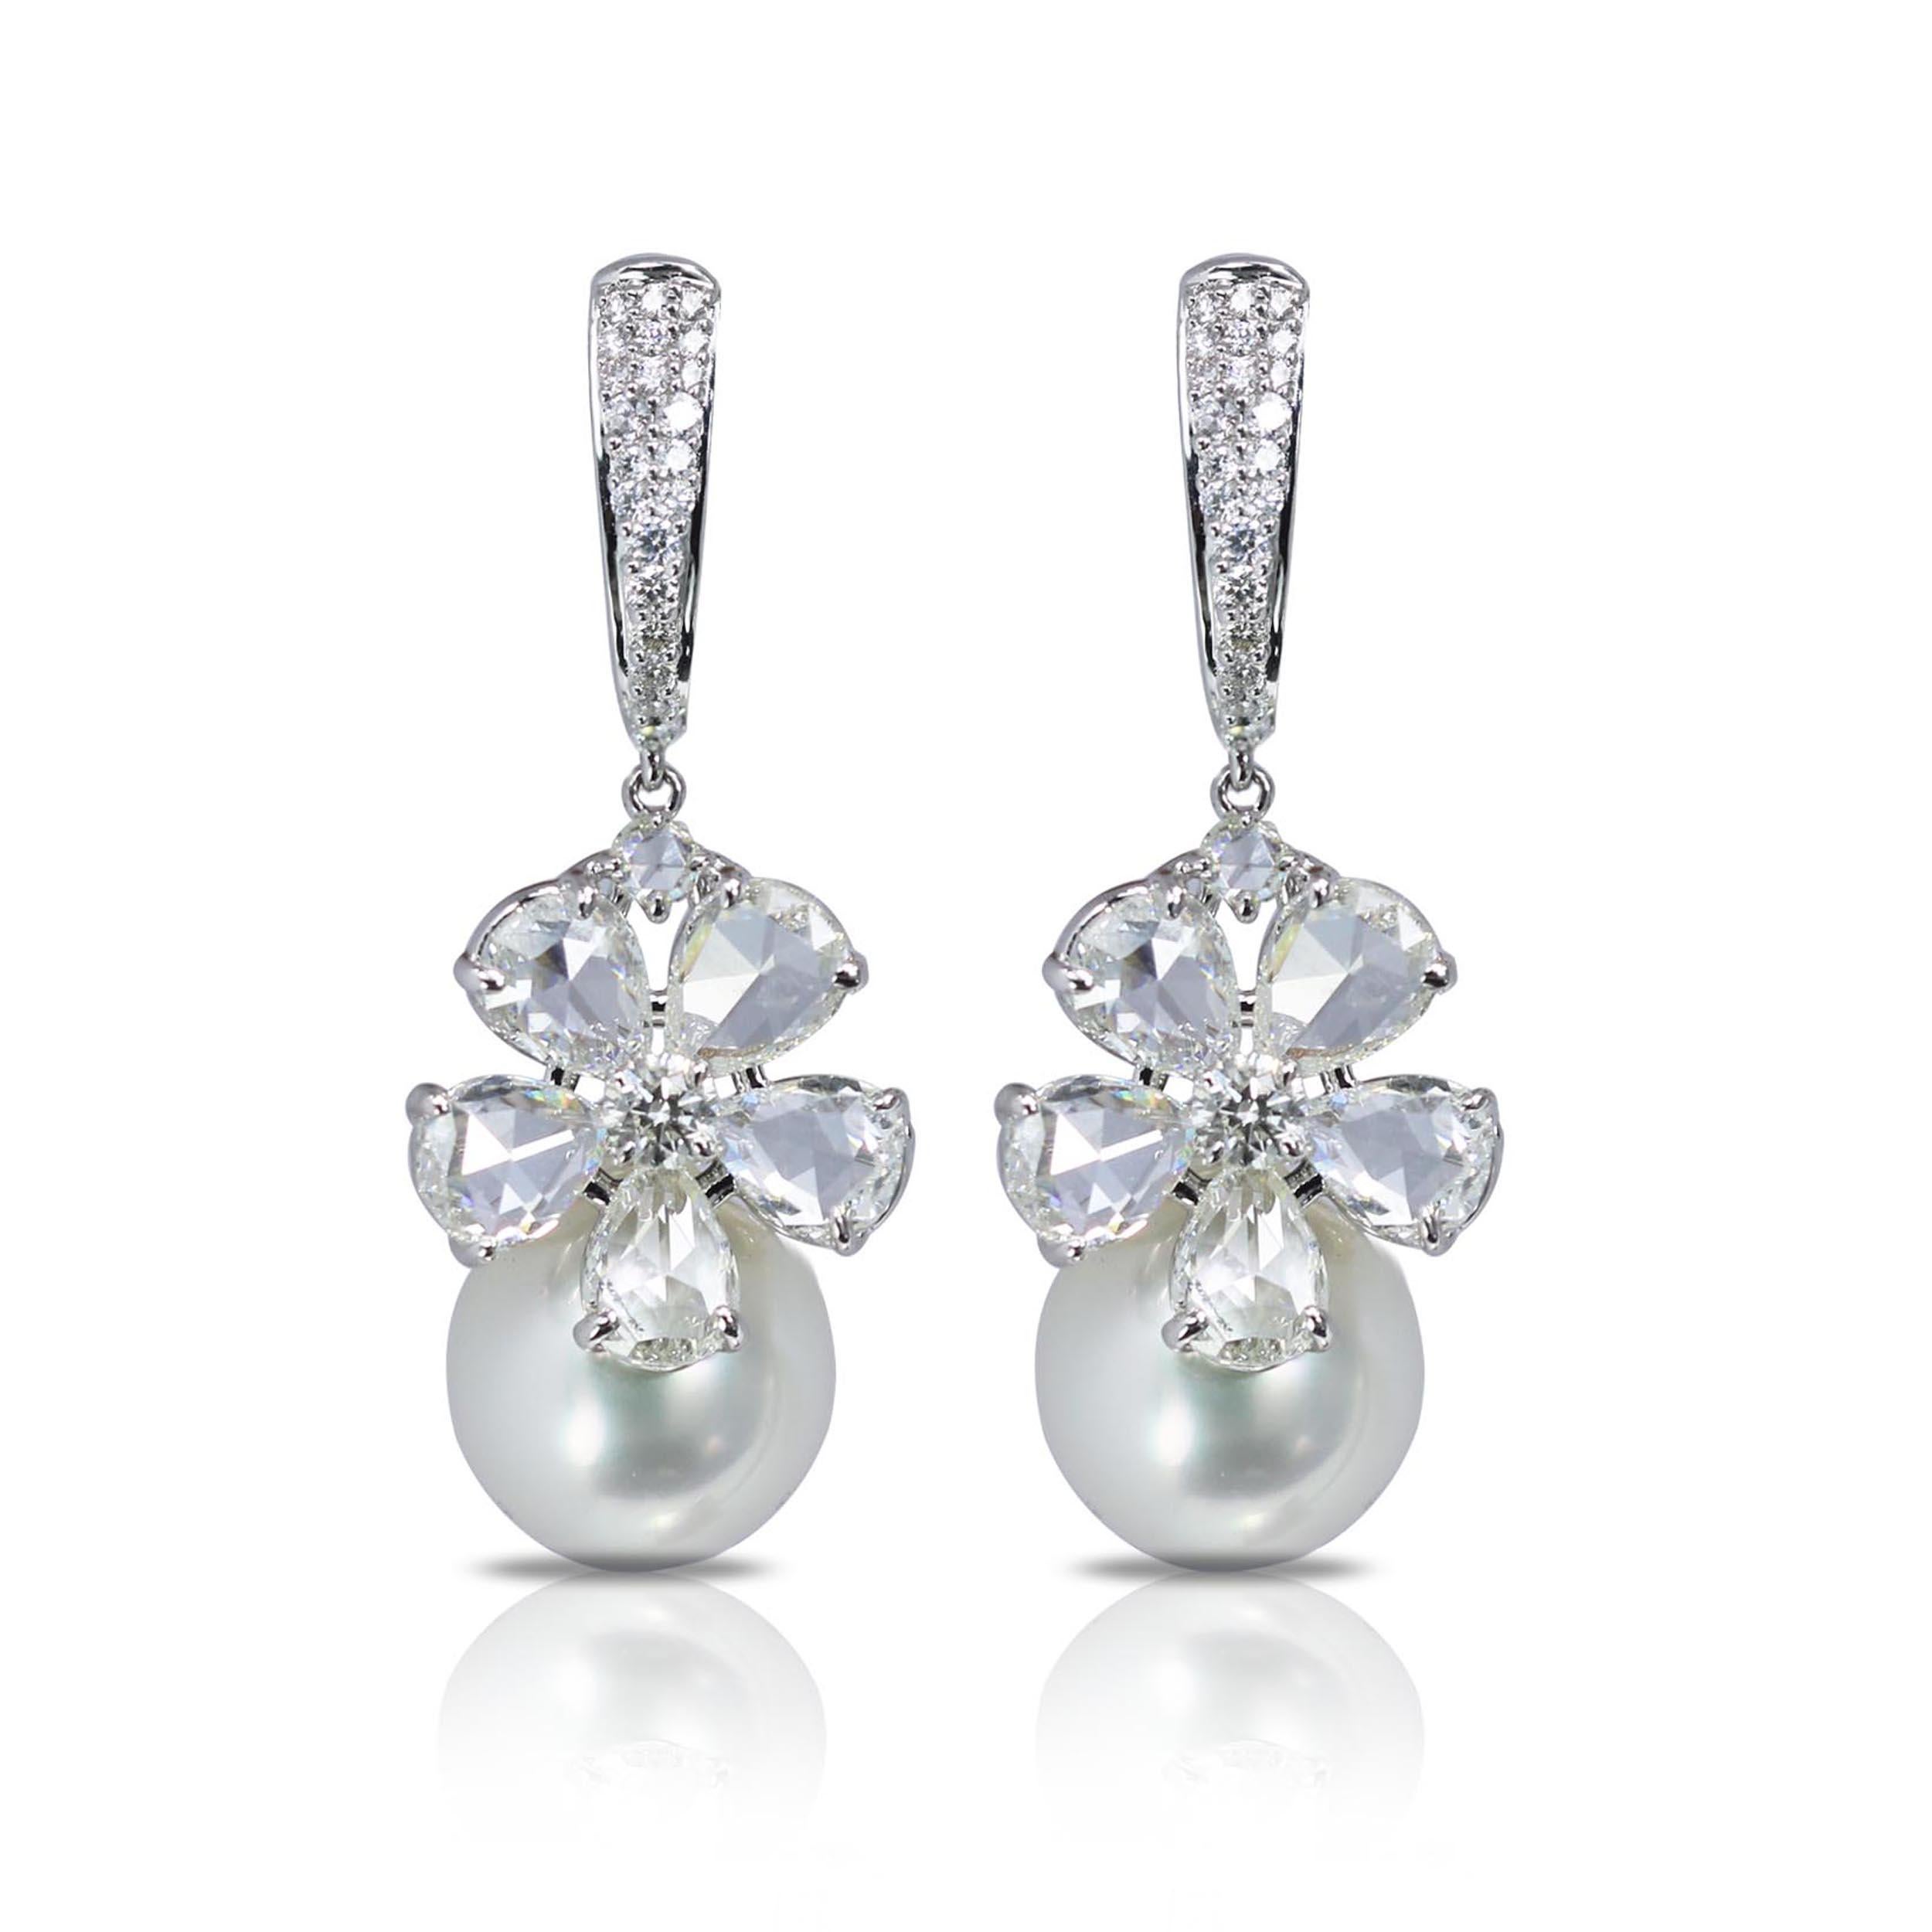 G-H/ VS-SI brilliant cut and rosecut diamonds and south sea pearl dangling earrings

This 18K white gold pair of drop earrings crafted in G-H color VS-SI brilliant cut and rosecut diamonds champions the ‘less is more’ aesthetic. Giving the classic